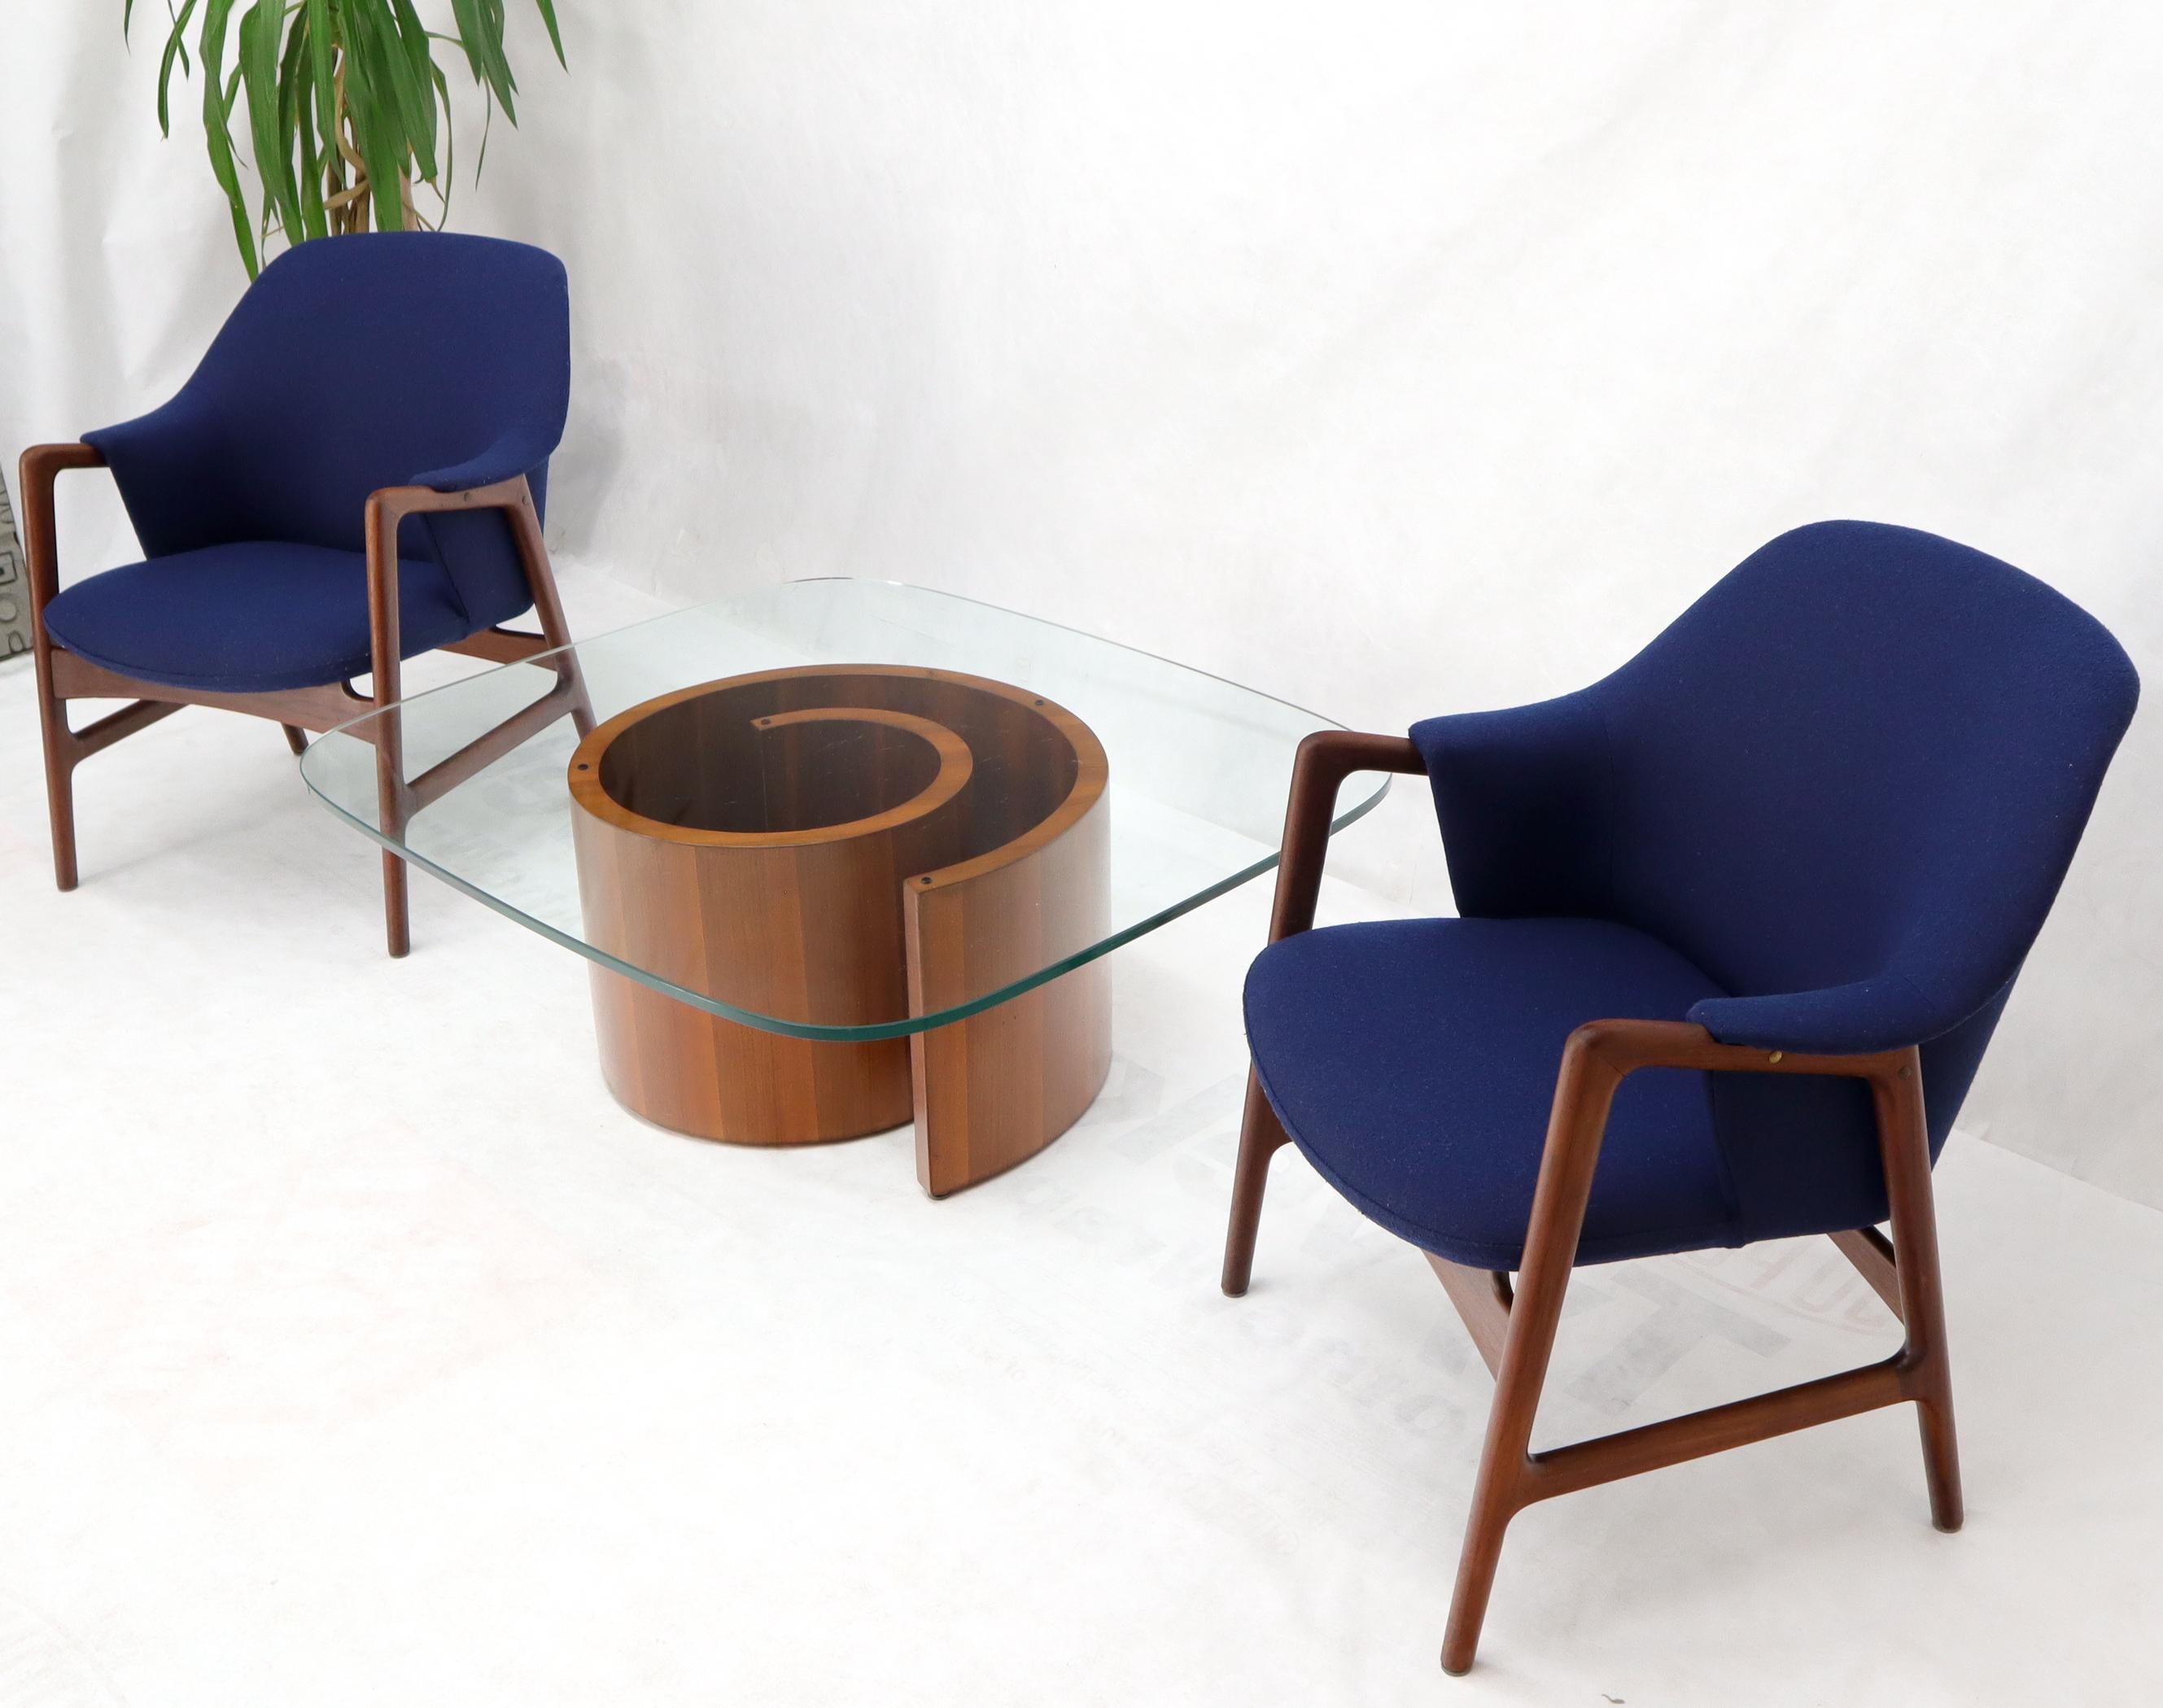 New Blue Wool Upholstery Teak Frames Danish Mid-Century Modern Lounge Chairs For Sale 5